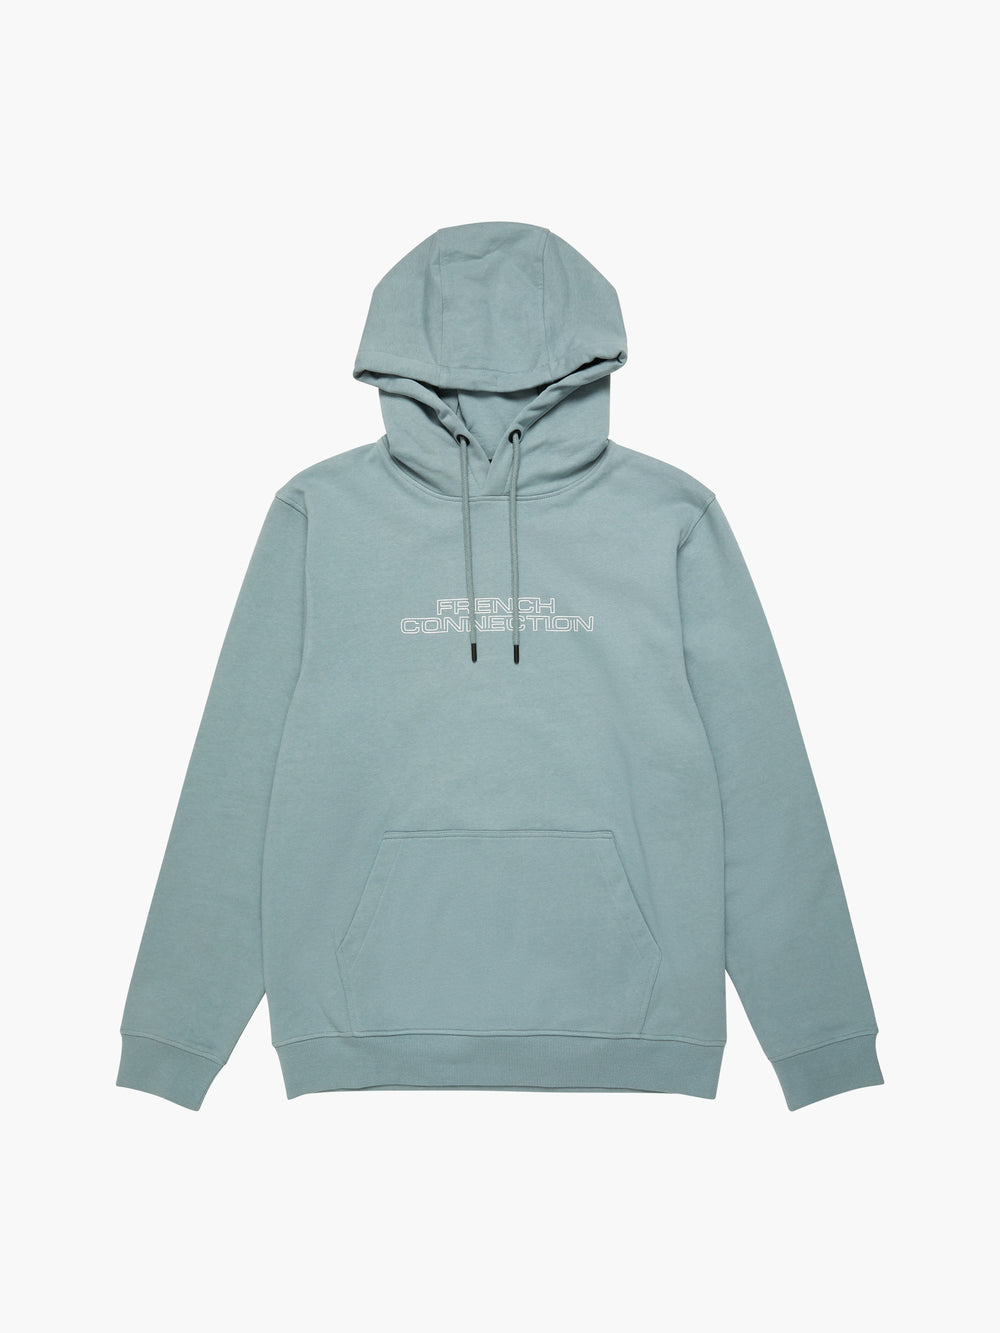 Spacefold Hoodie Lead | French Connection UK